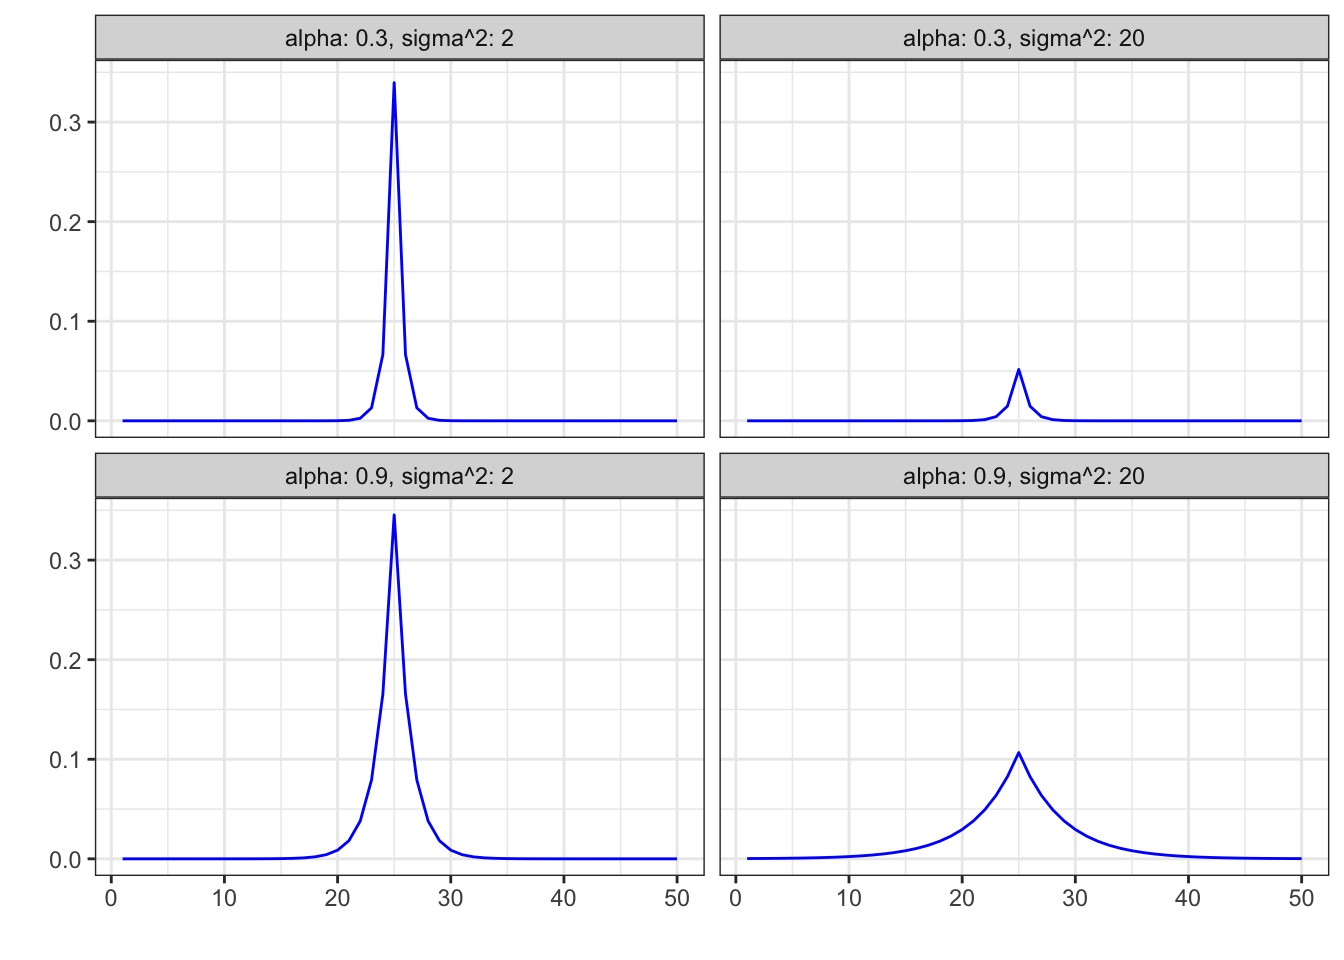 Gaussian smoother matrix $S_{25,j}$ with $\alpha = 0.3, 0.9$, $\sigma^2 = 2, 20$